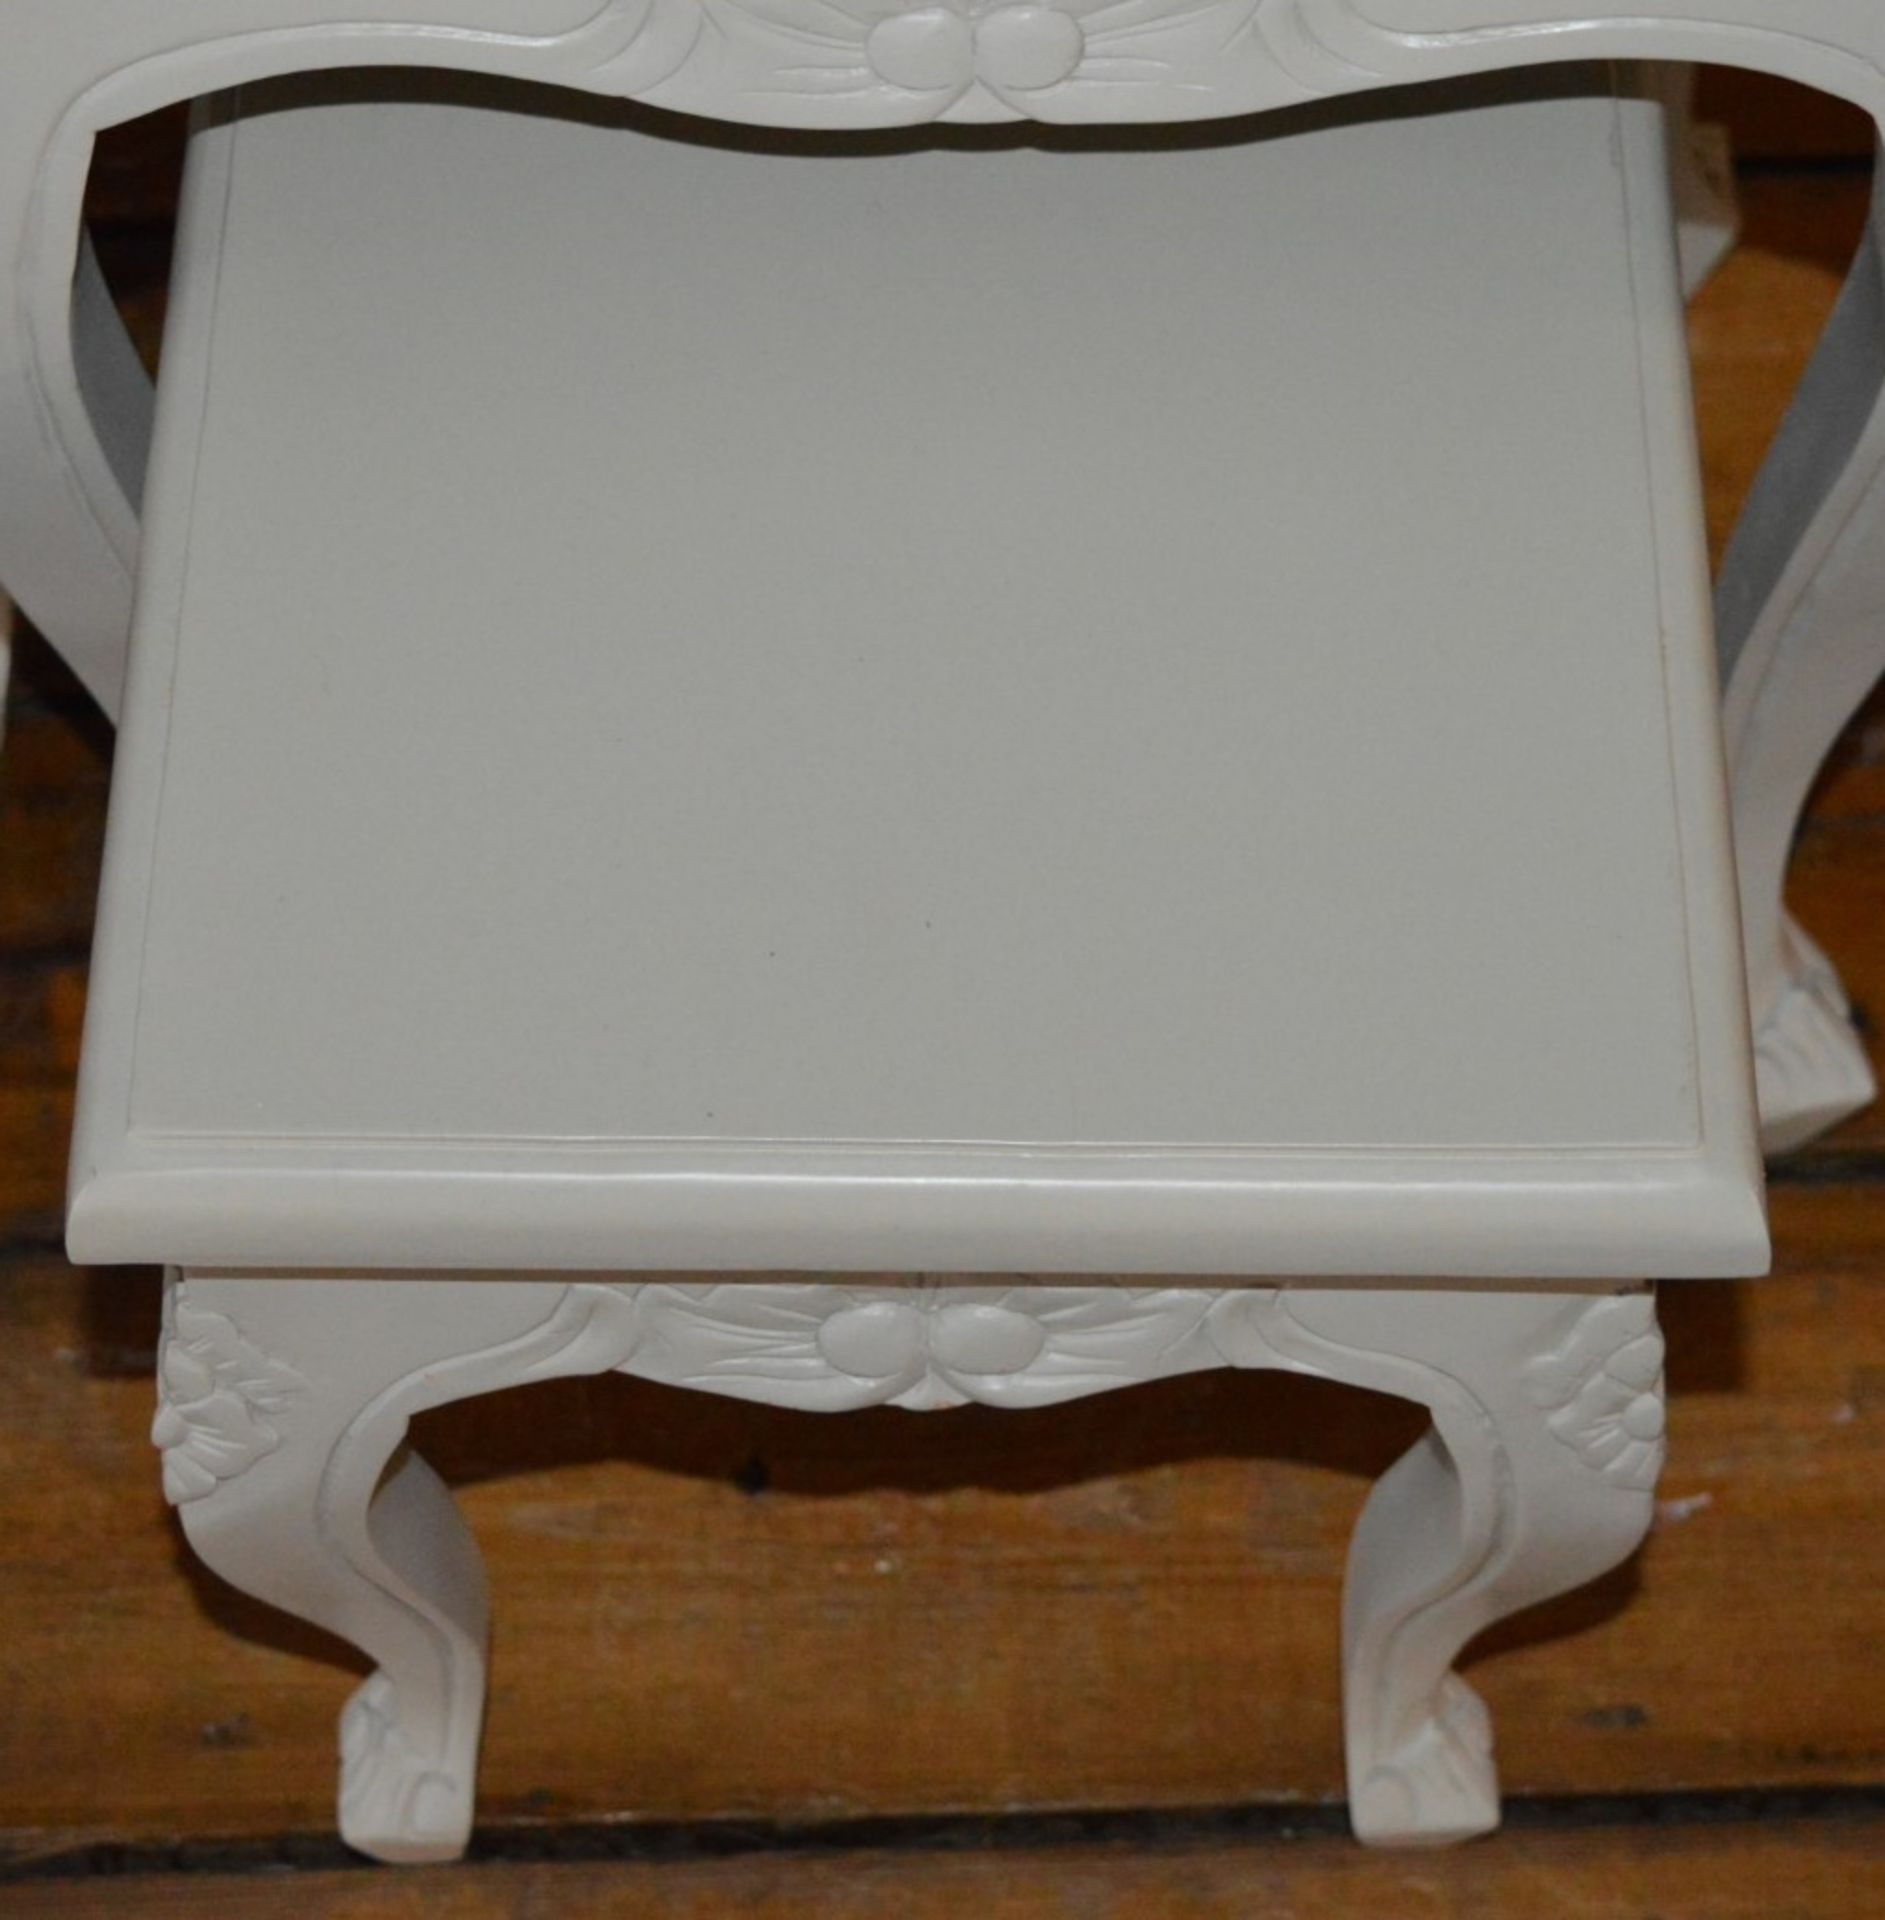 1 x Nest of Three Tables Finished in a Contemporary Grey - H61 x W59 x D45 cms - Ref BB1715 2F - - Image 2 of 6